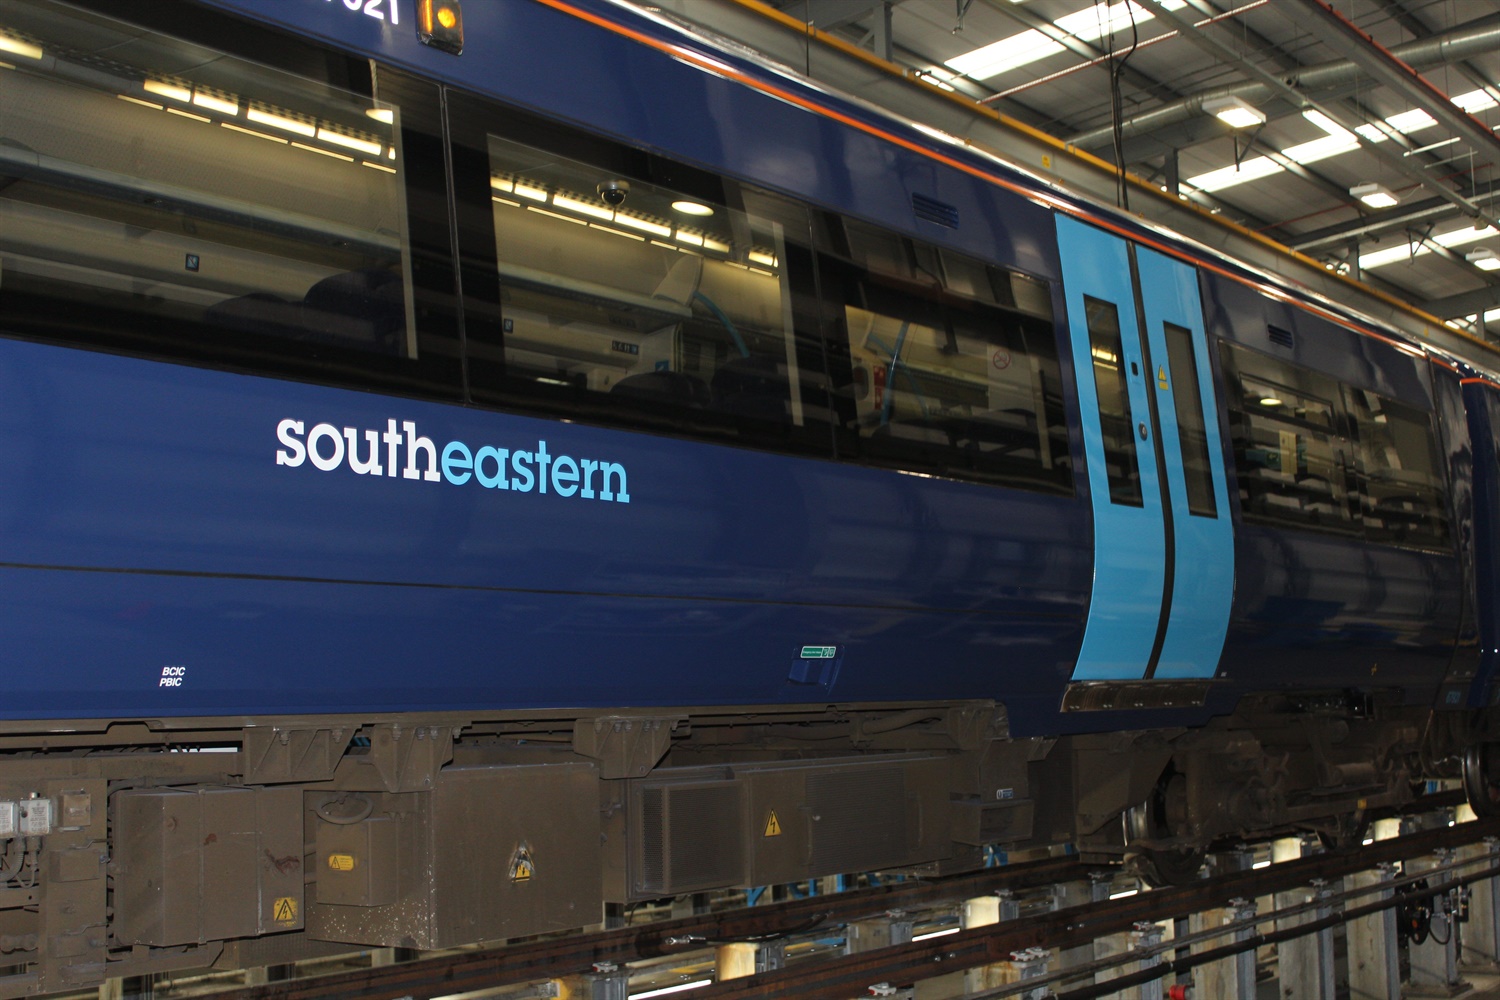 Southeastern’s Class 375s get mid-life refresh